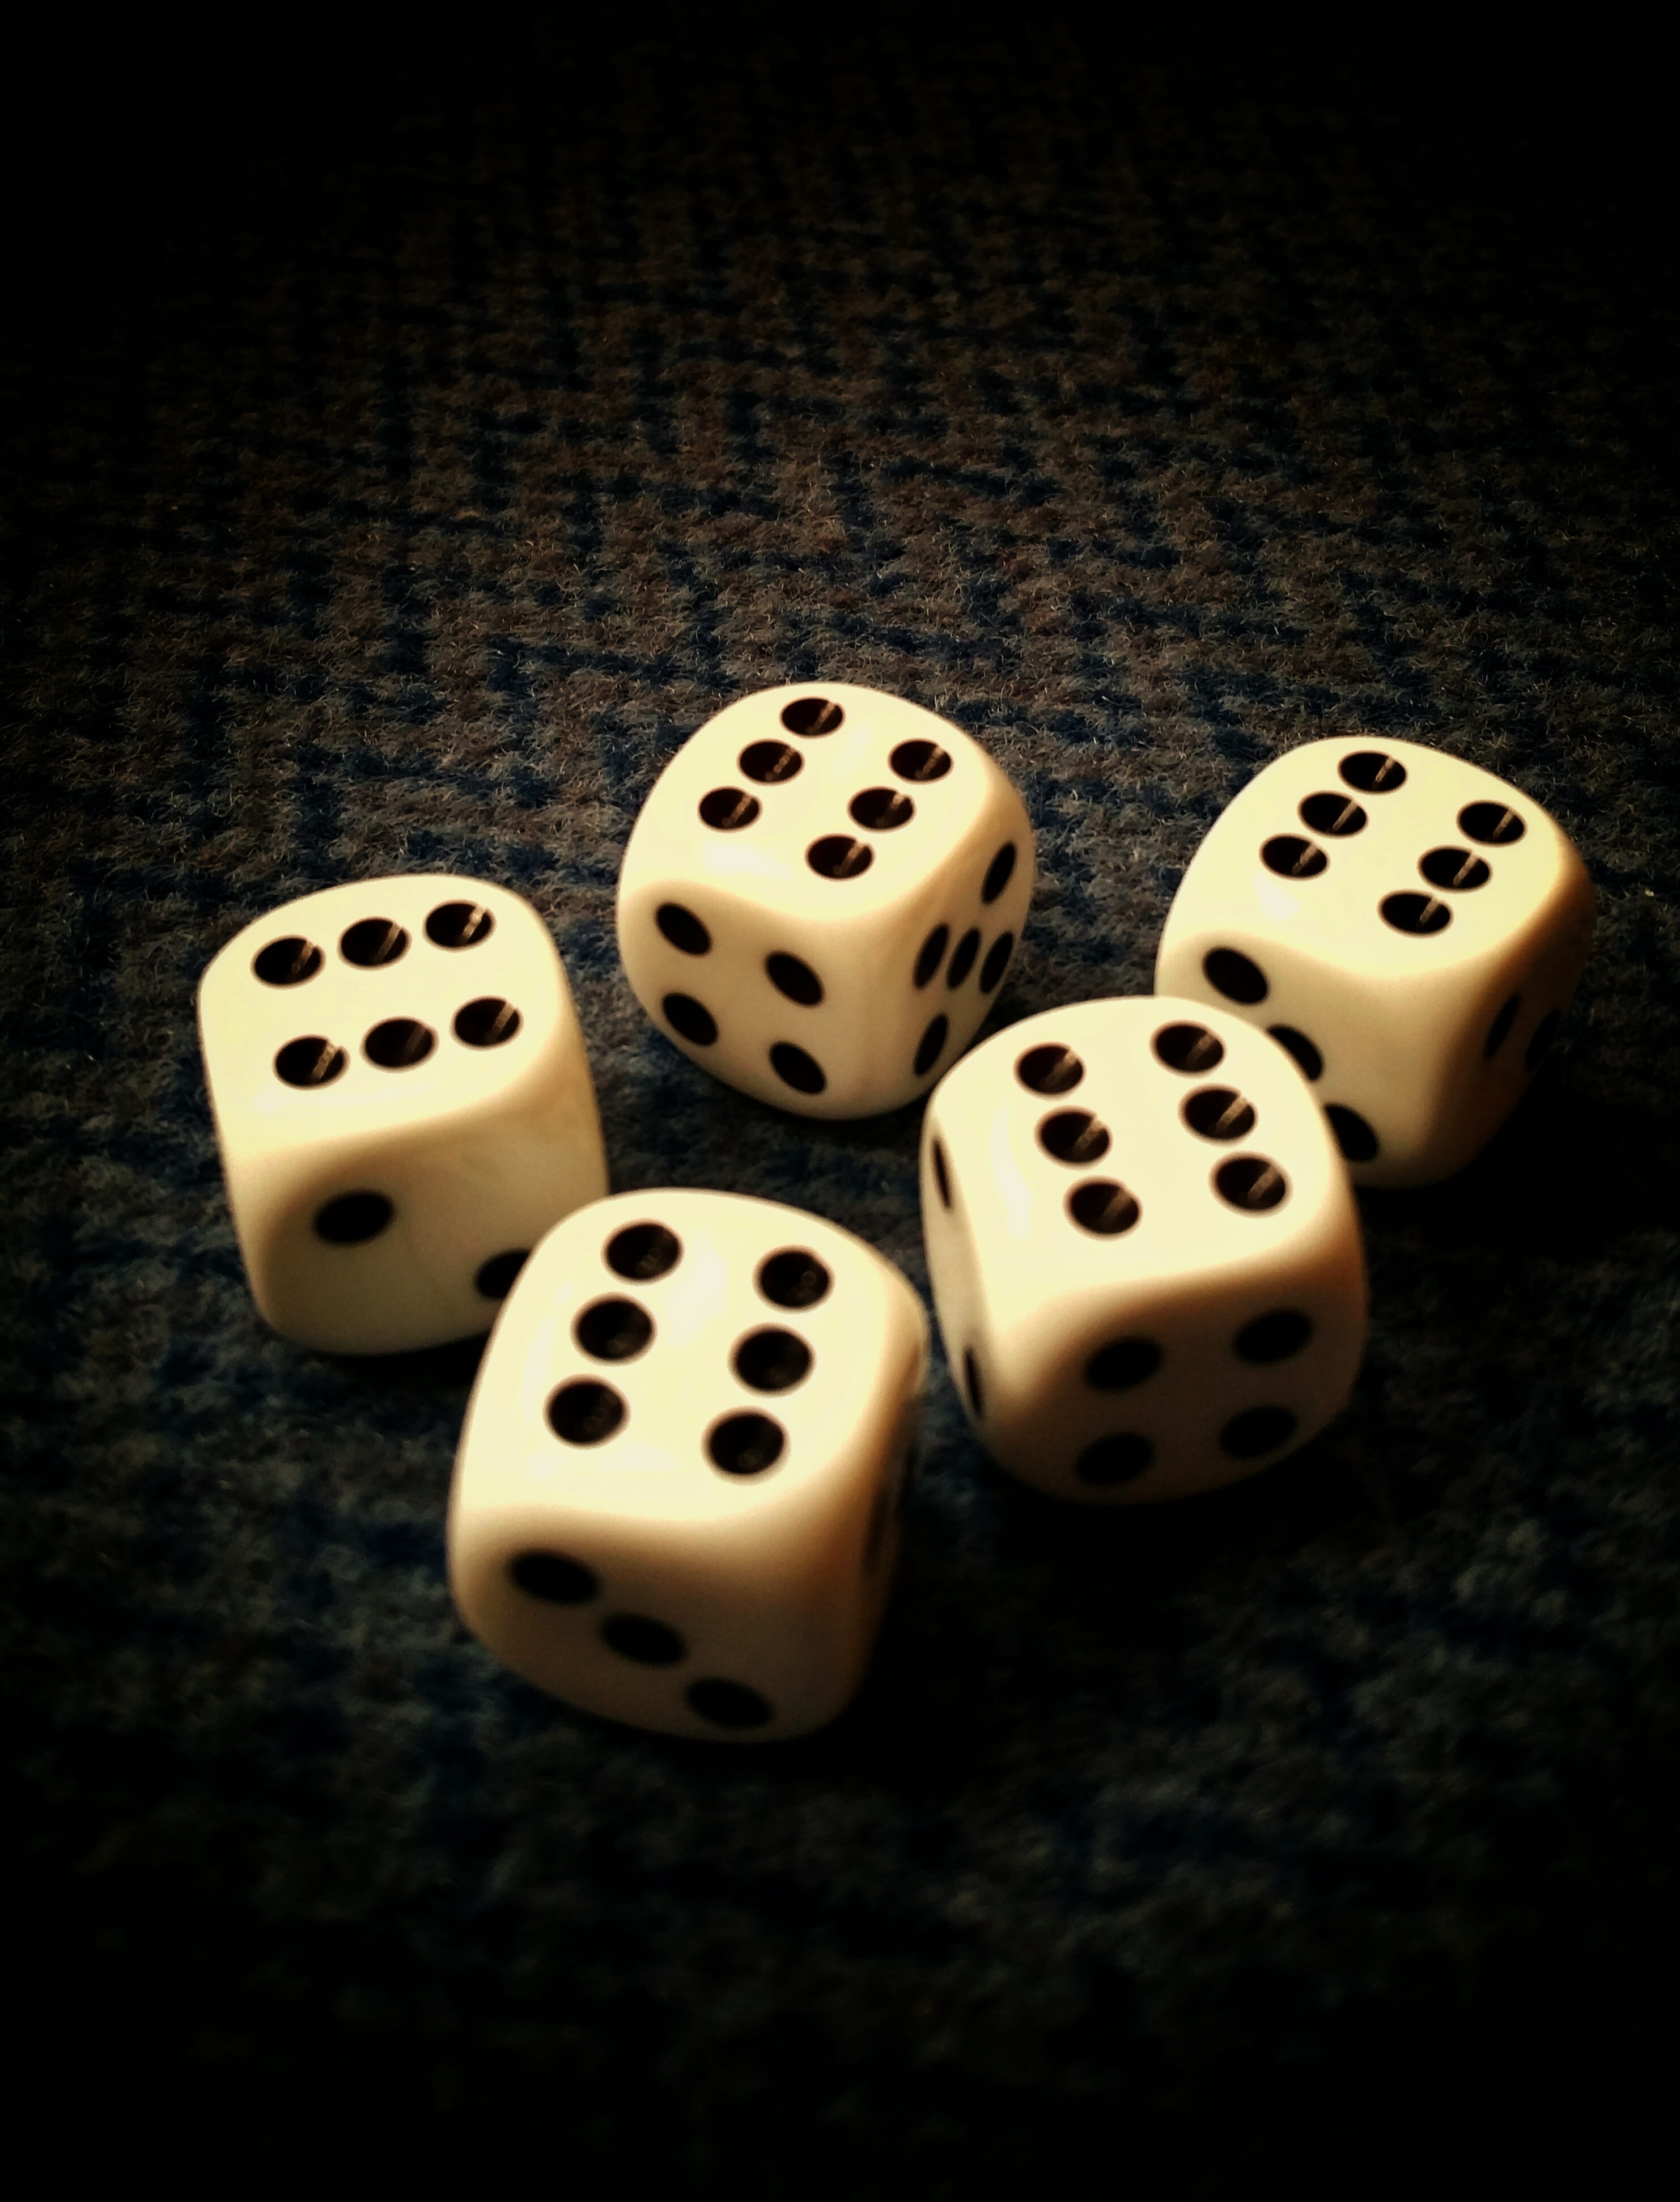 Free download | HD wallpaper: five dices at 6, Cube, Play, Lucky Number ...